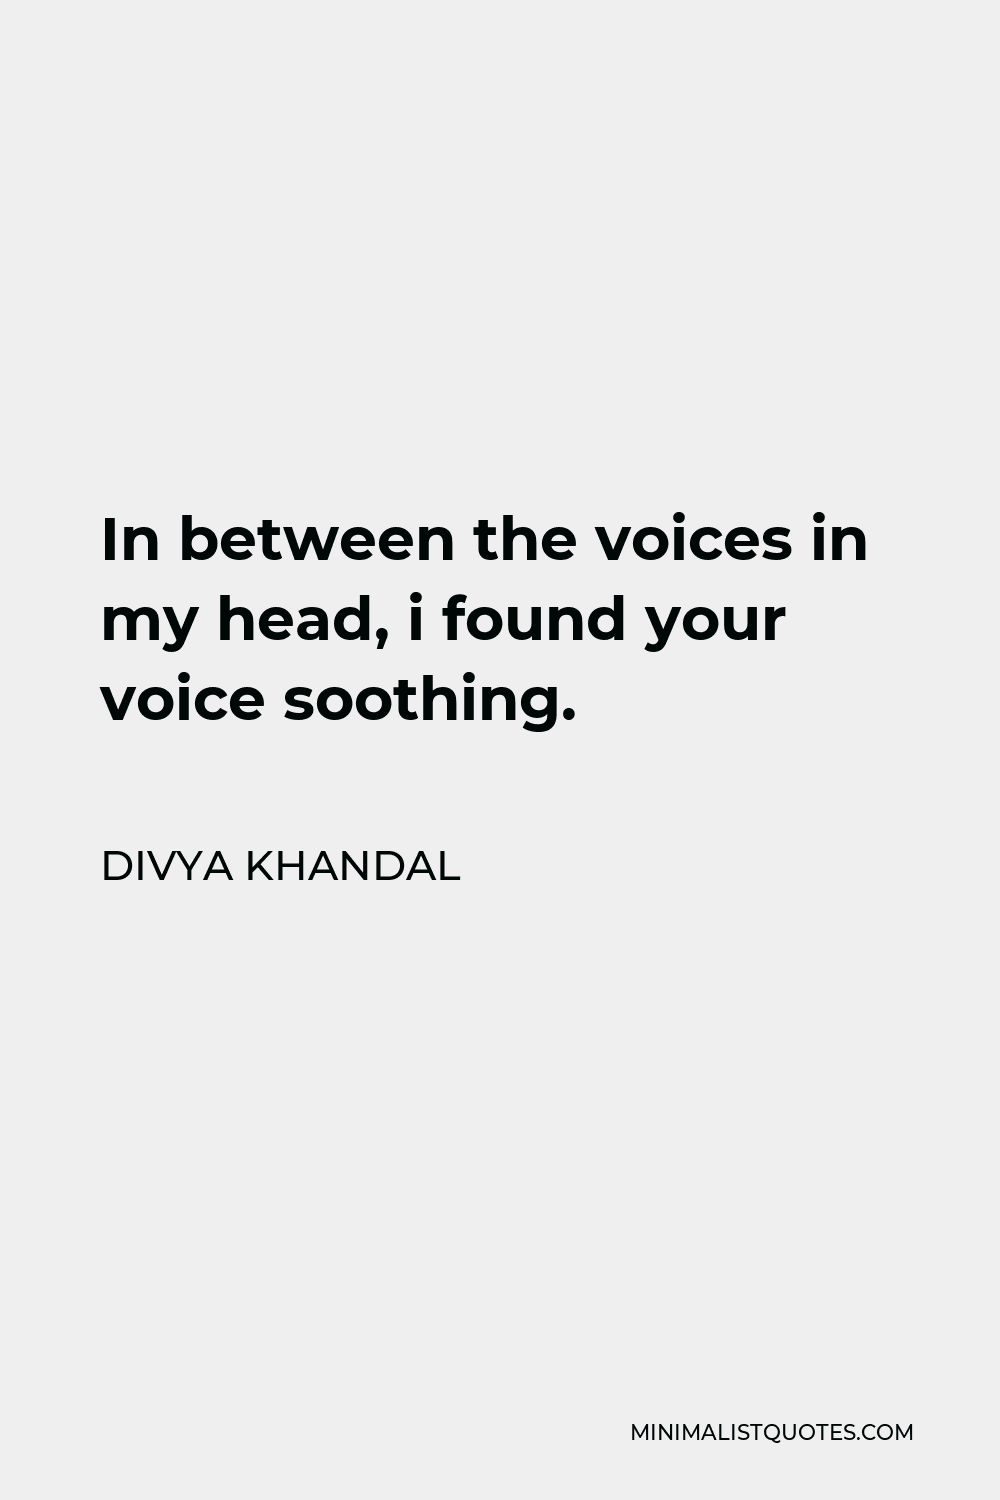 Divya khandal Quote - In between the voices in my head, i found your voice soothing.